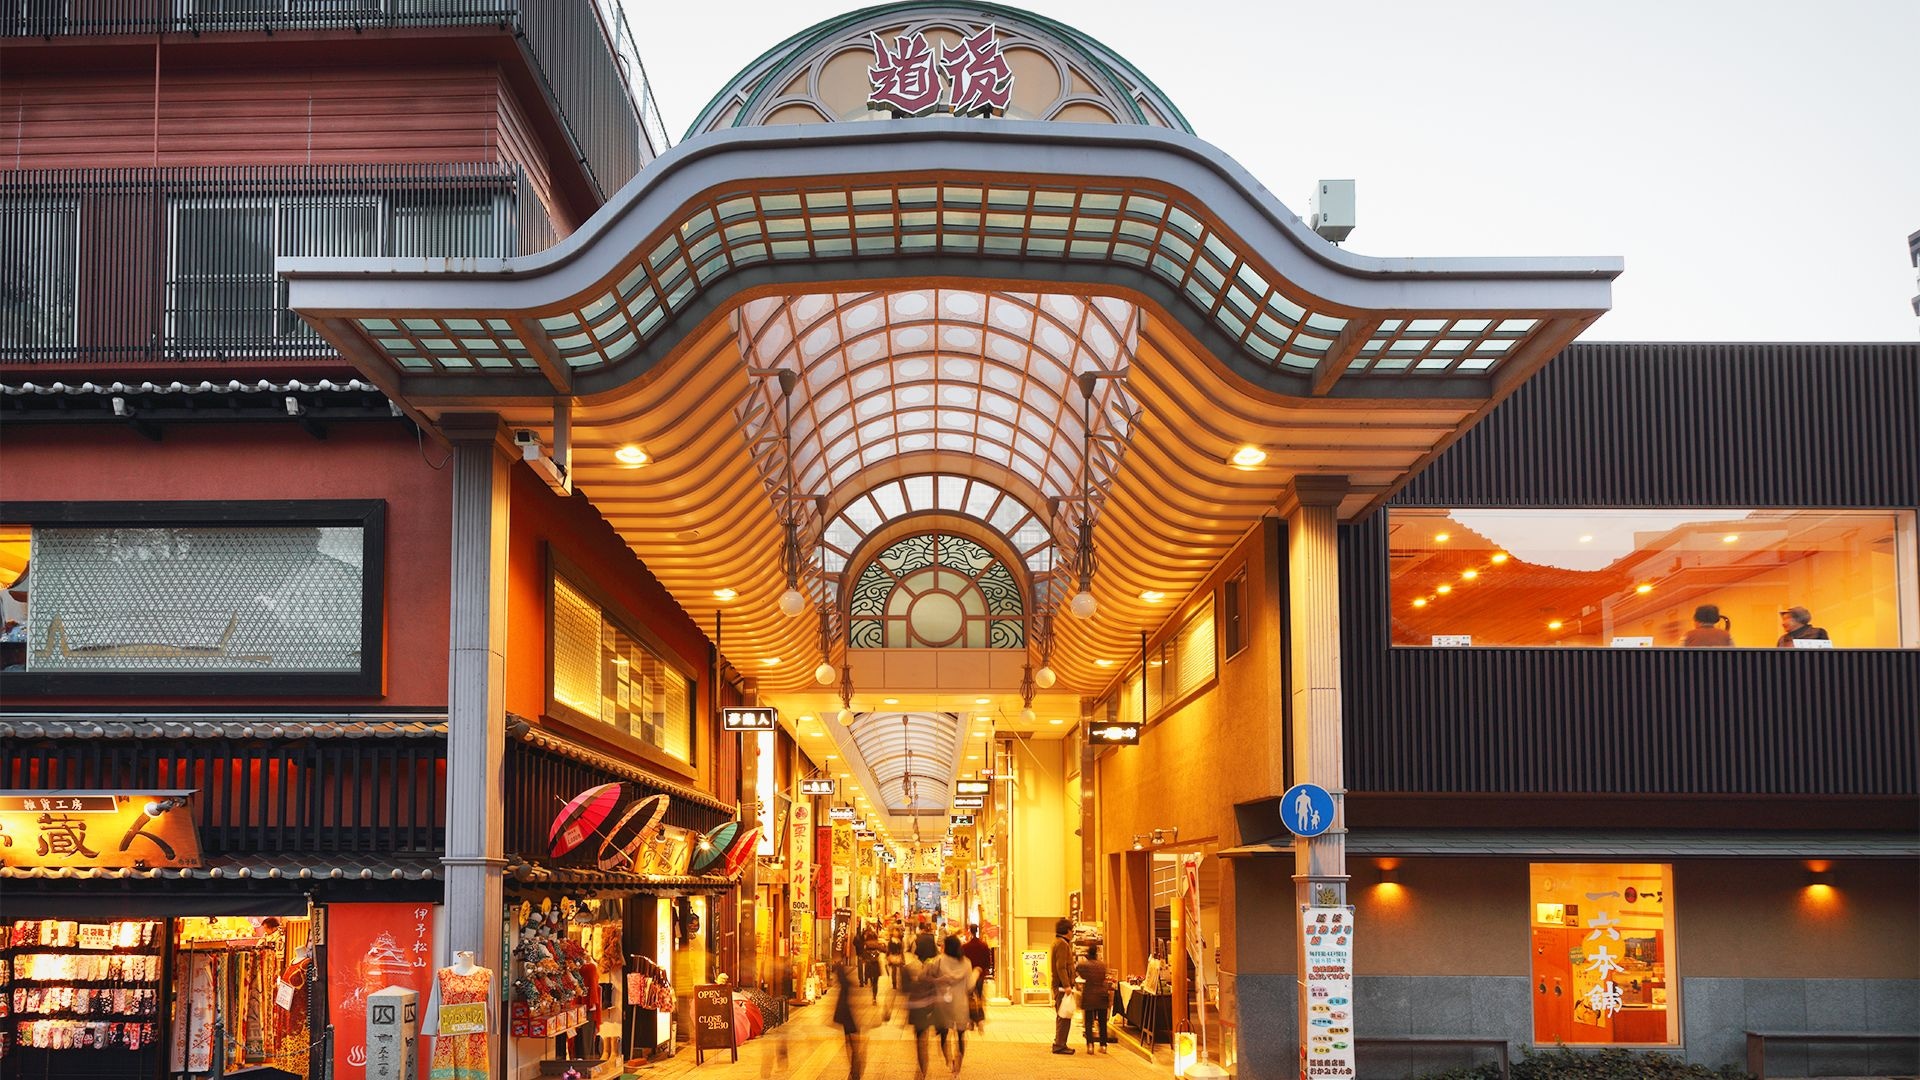 Dogo Haikara Dori Shopping Street is right in front of the Dogo Onsen Main Building. A short walk from the hotel!